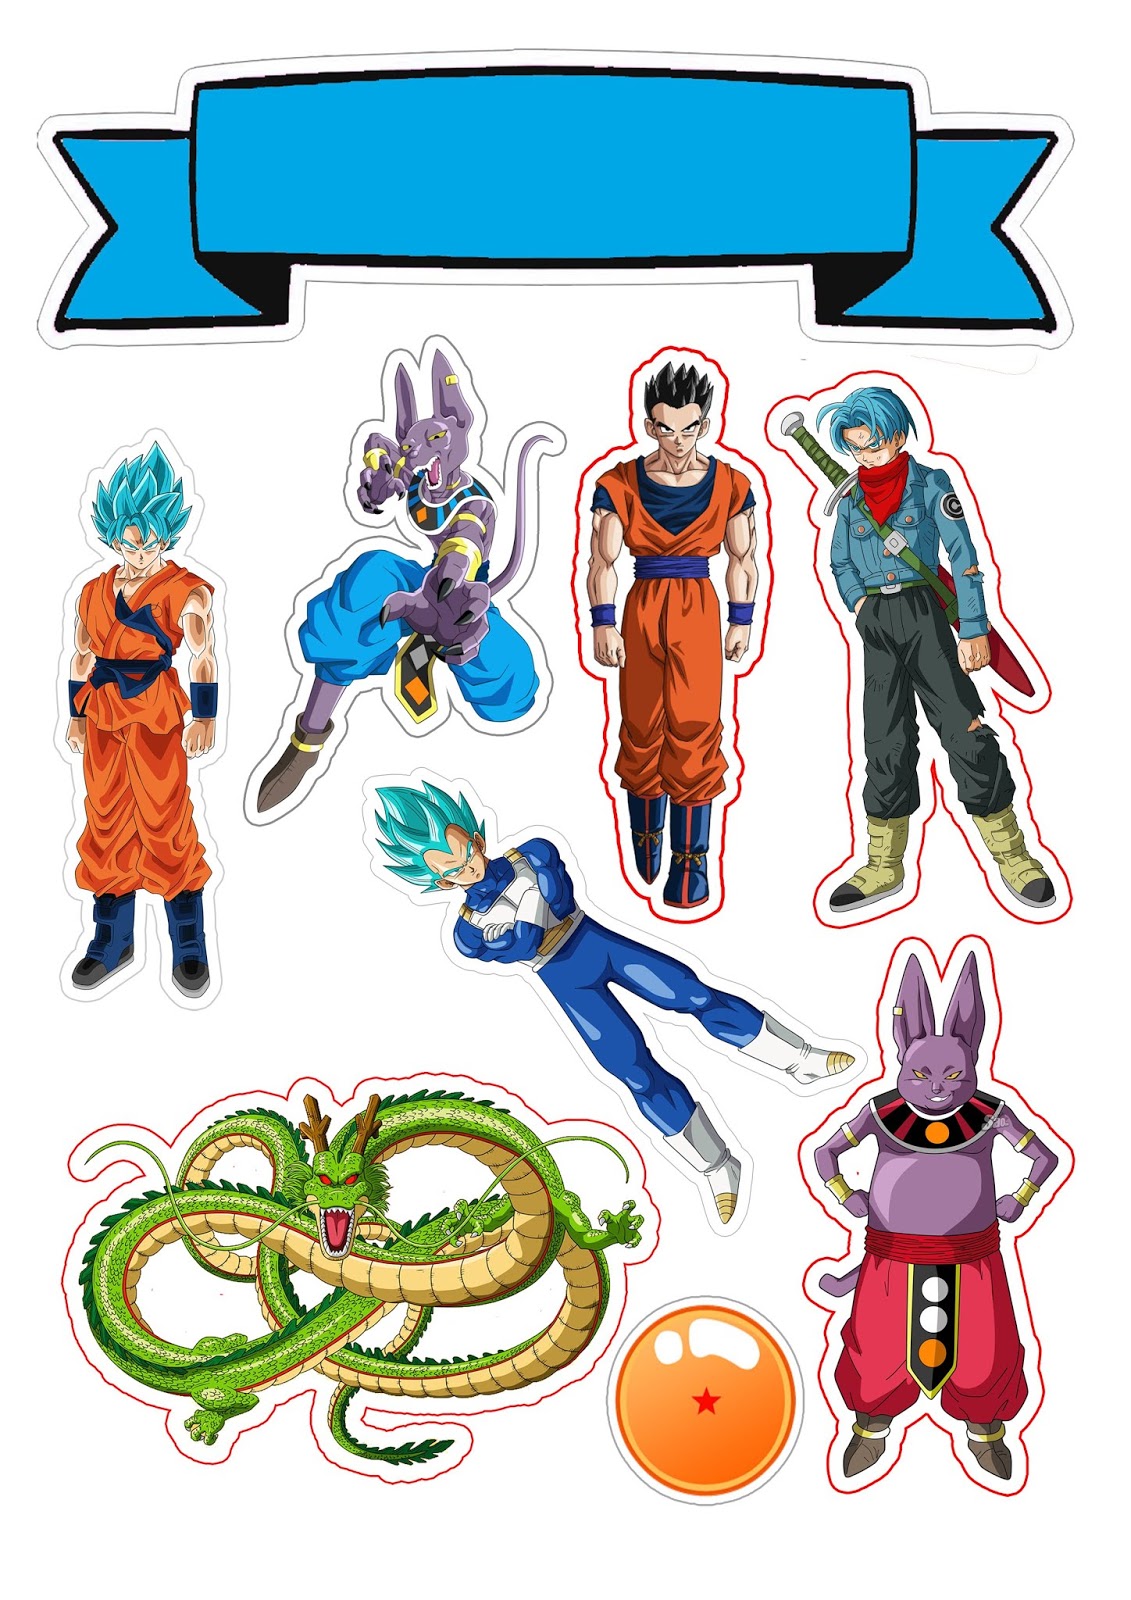 Dragon Ball Z: Free Printable Cake and Cupcake Toppers. - Oh My Fiesta! for Geeks